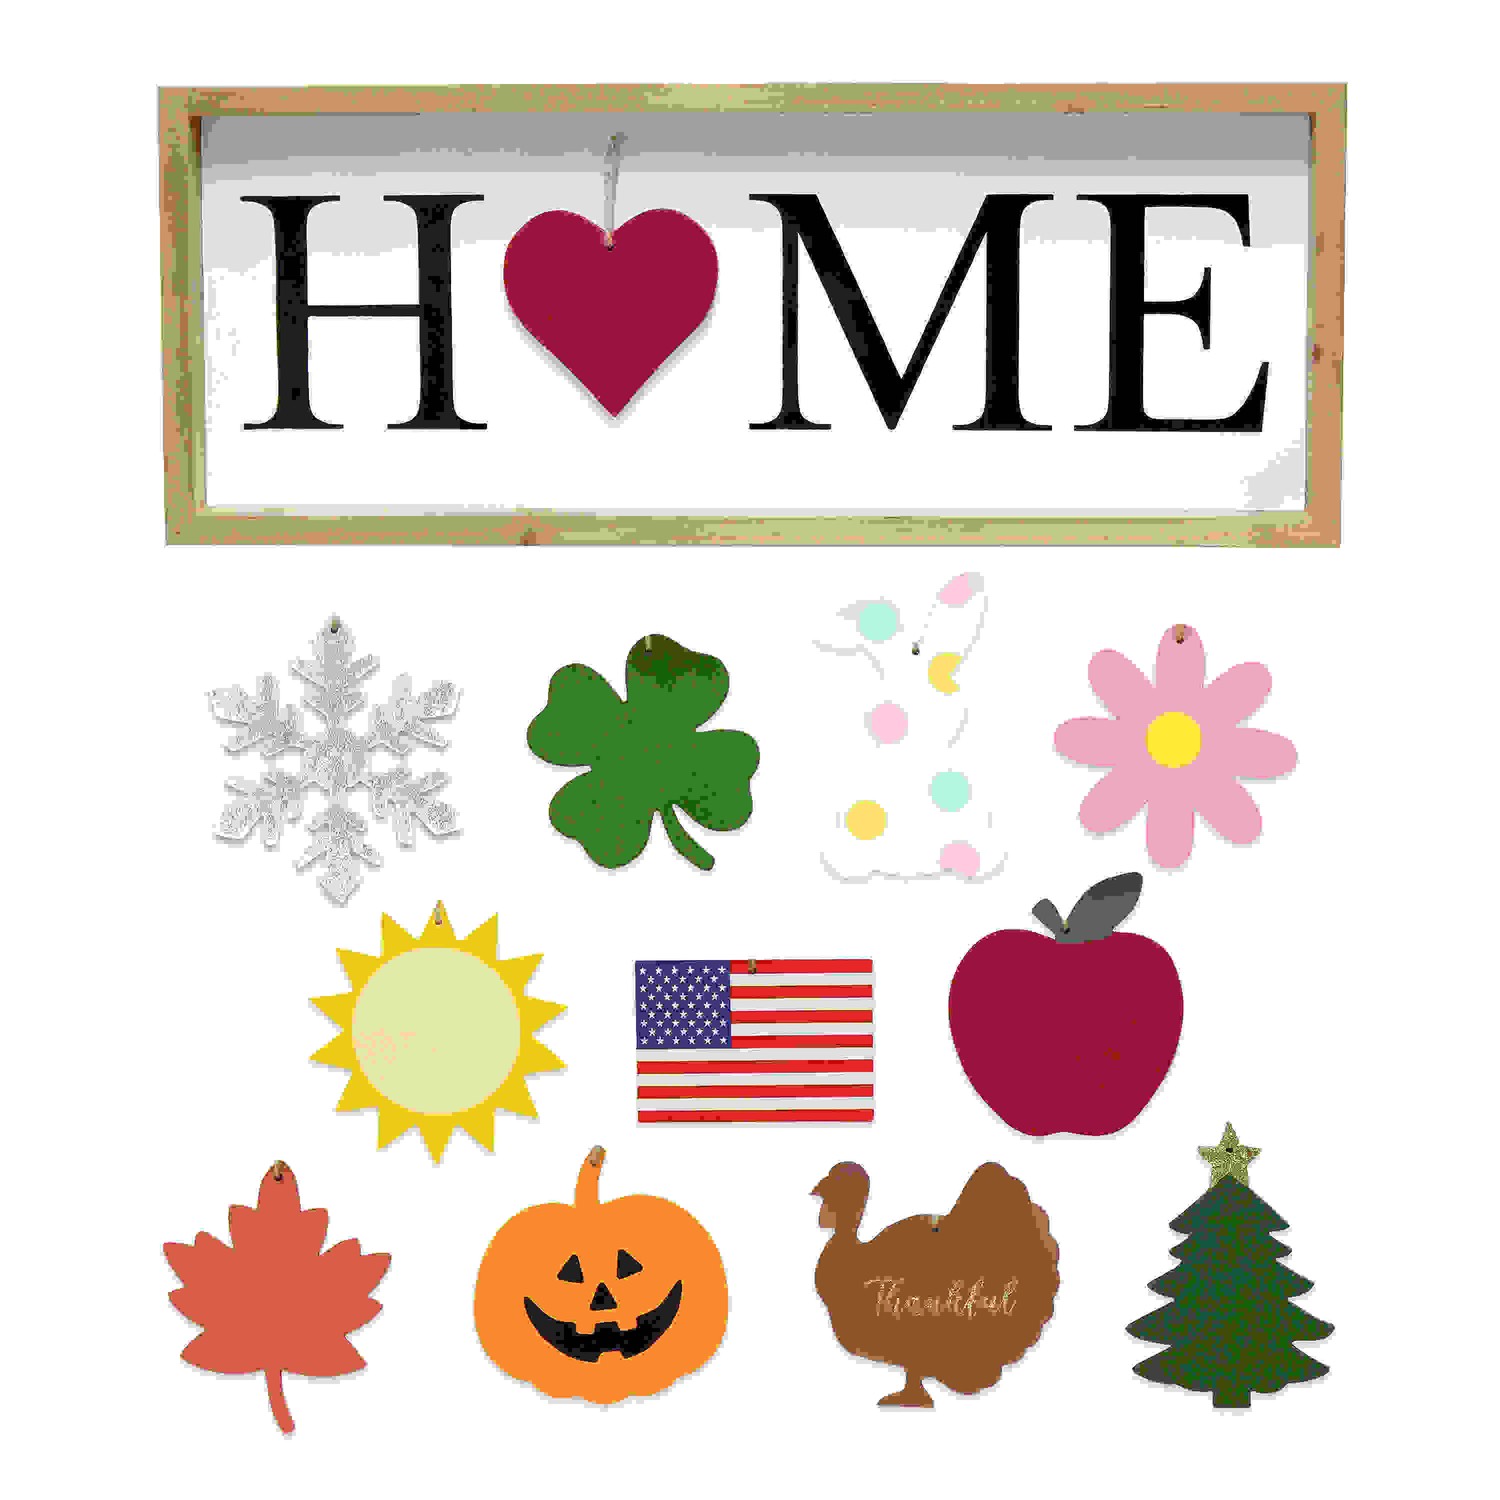 Elegant Designs Rustic Farmhouse Wooden Seasonal Interchangeable Symbol "Home" Frame with 12 Ornaments, Natural